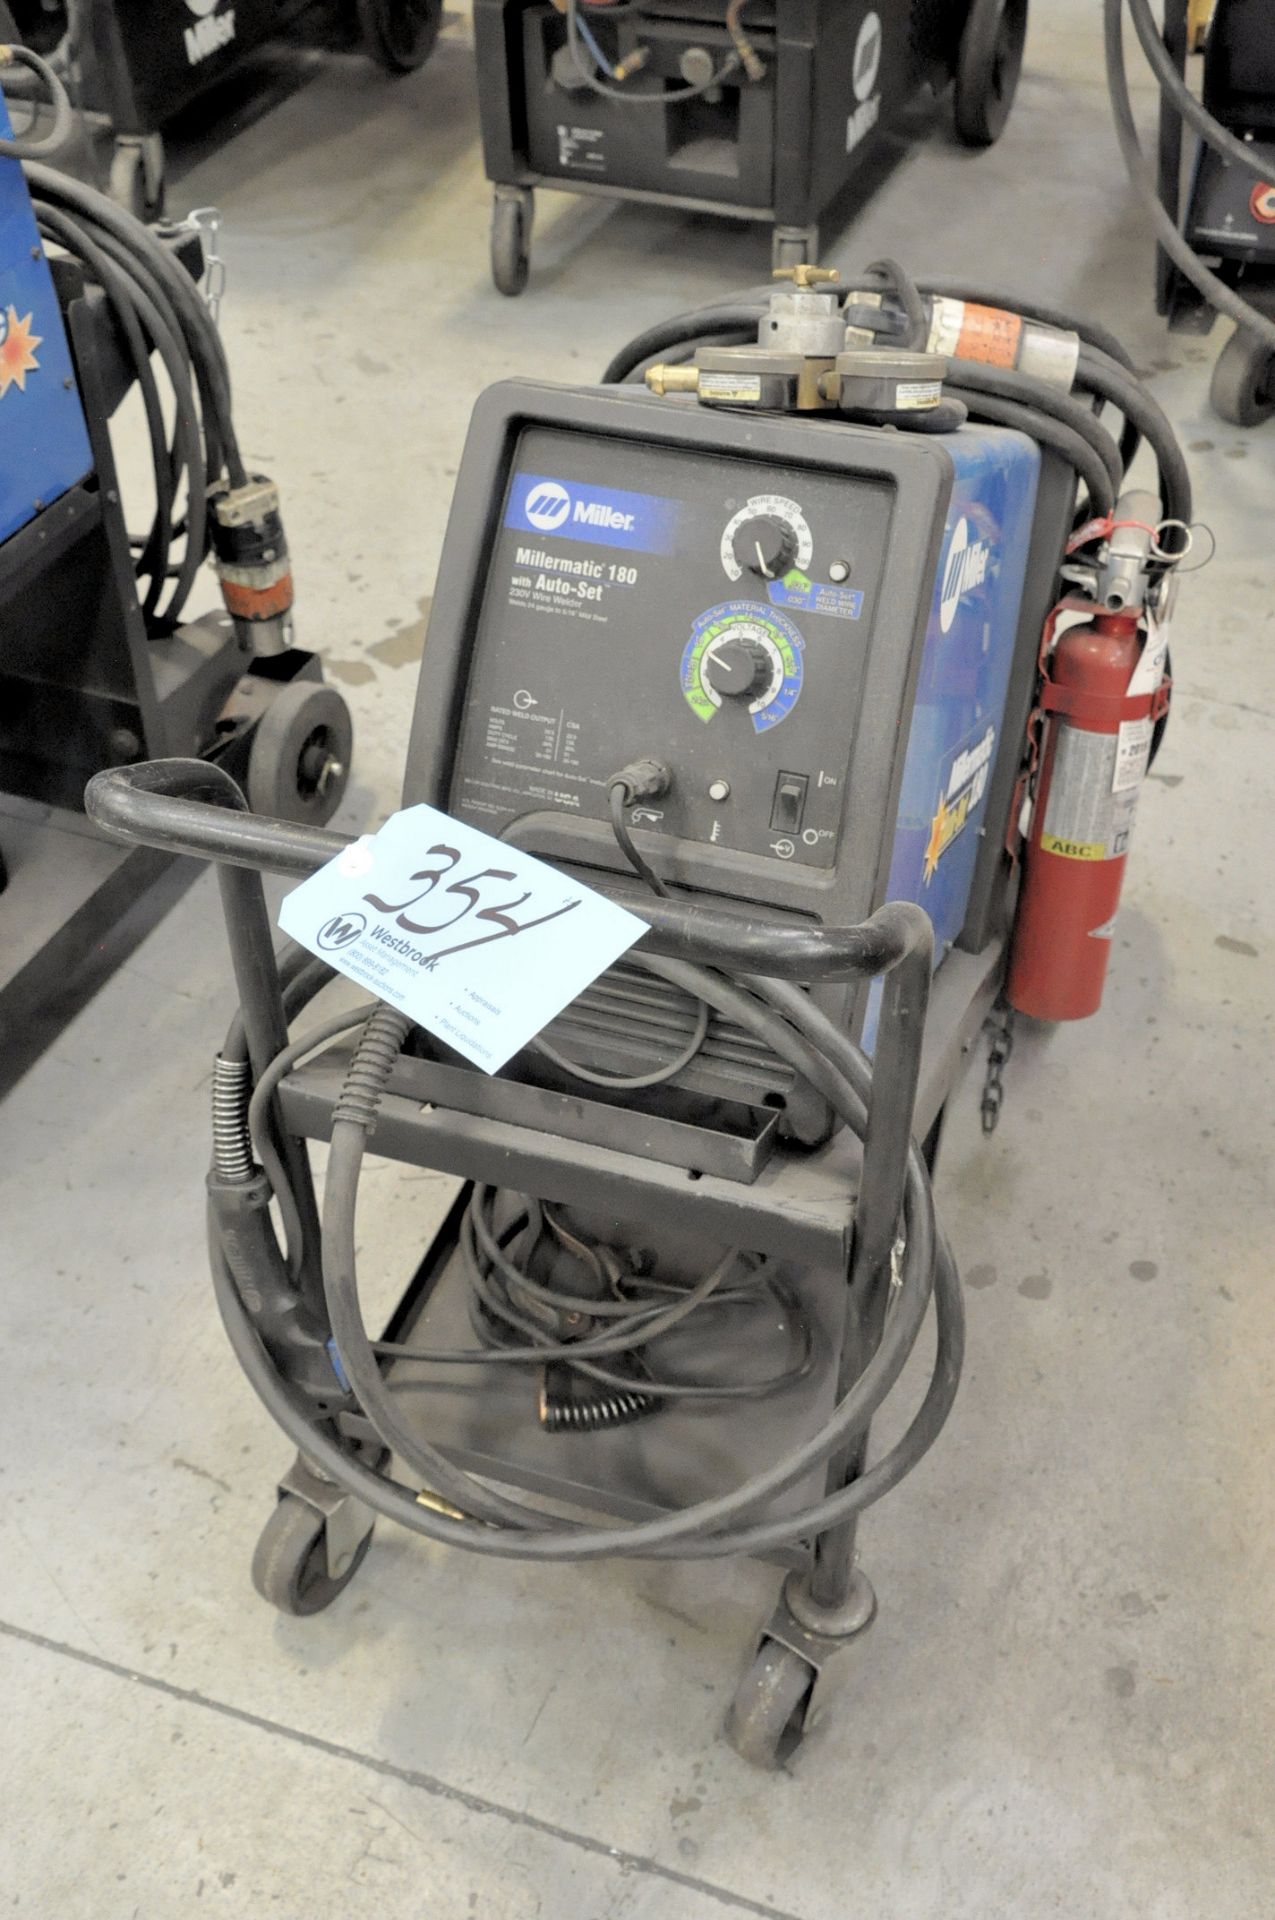 Miller Millermatic 180 Auto-Set, 135-Amps Mig Welding Power Source, with Leads, Portable (2008)